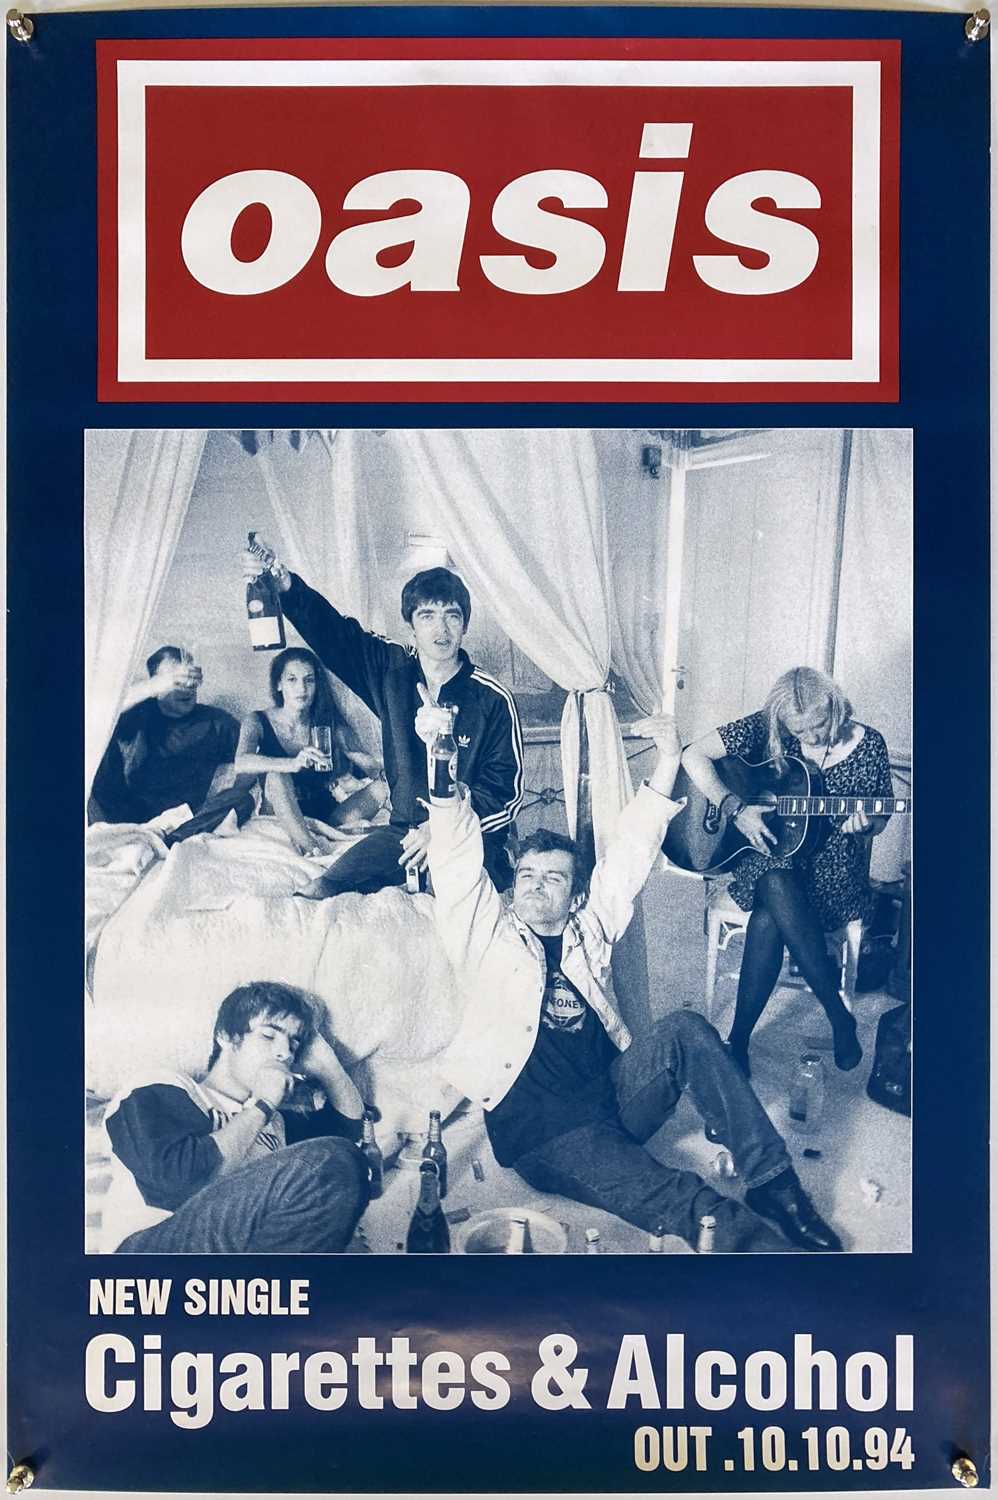 Lot 441 - OASIS CIGARETTES AND ALCOHOL PROMOTIONAL POSTER.